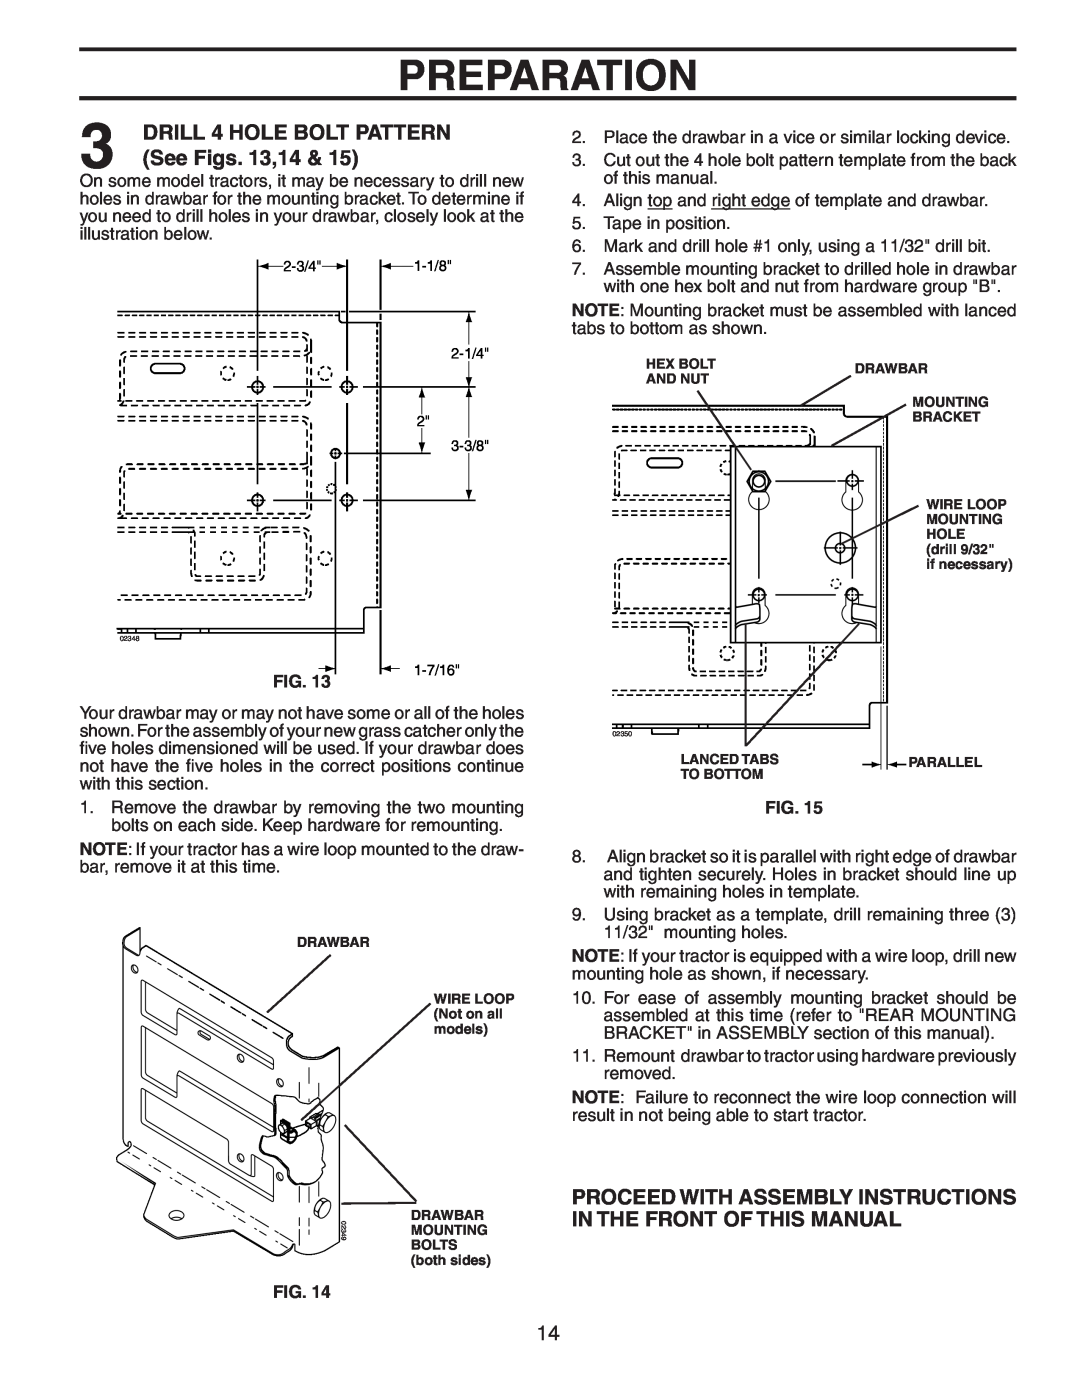 Poulan 140603 See Figs. 13,14, DRILL 4 HOLE BOLT PATTERN, Proceed With Assembly Instructions In The Front Of This Manual 